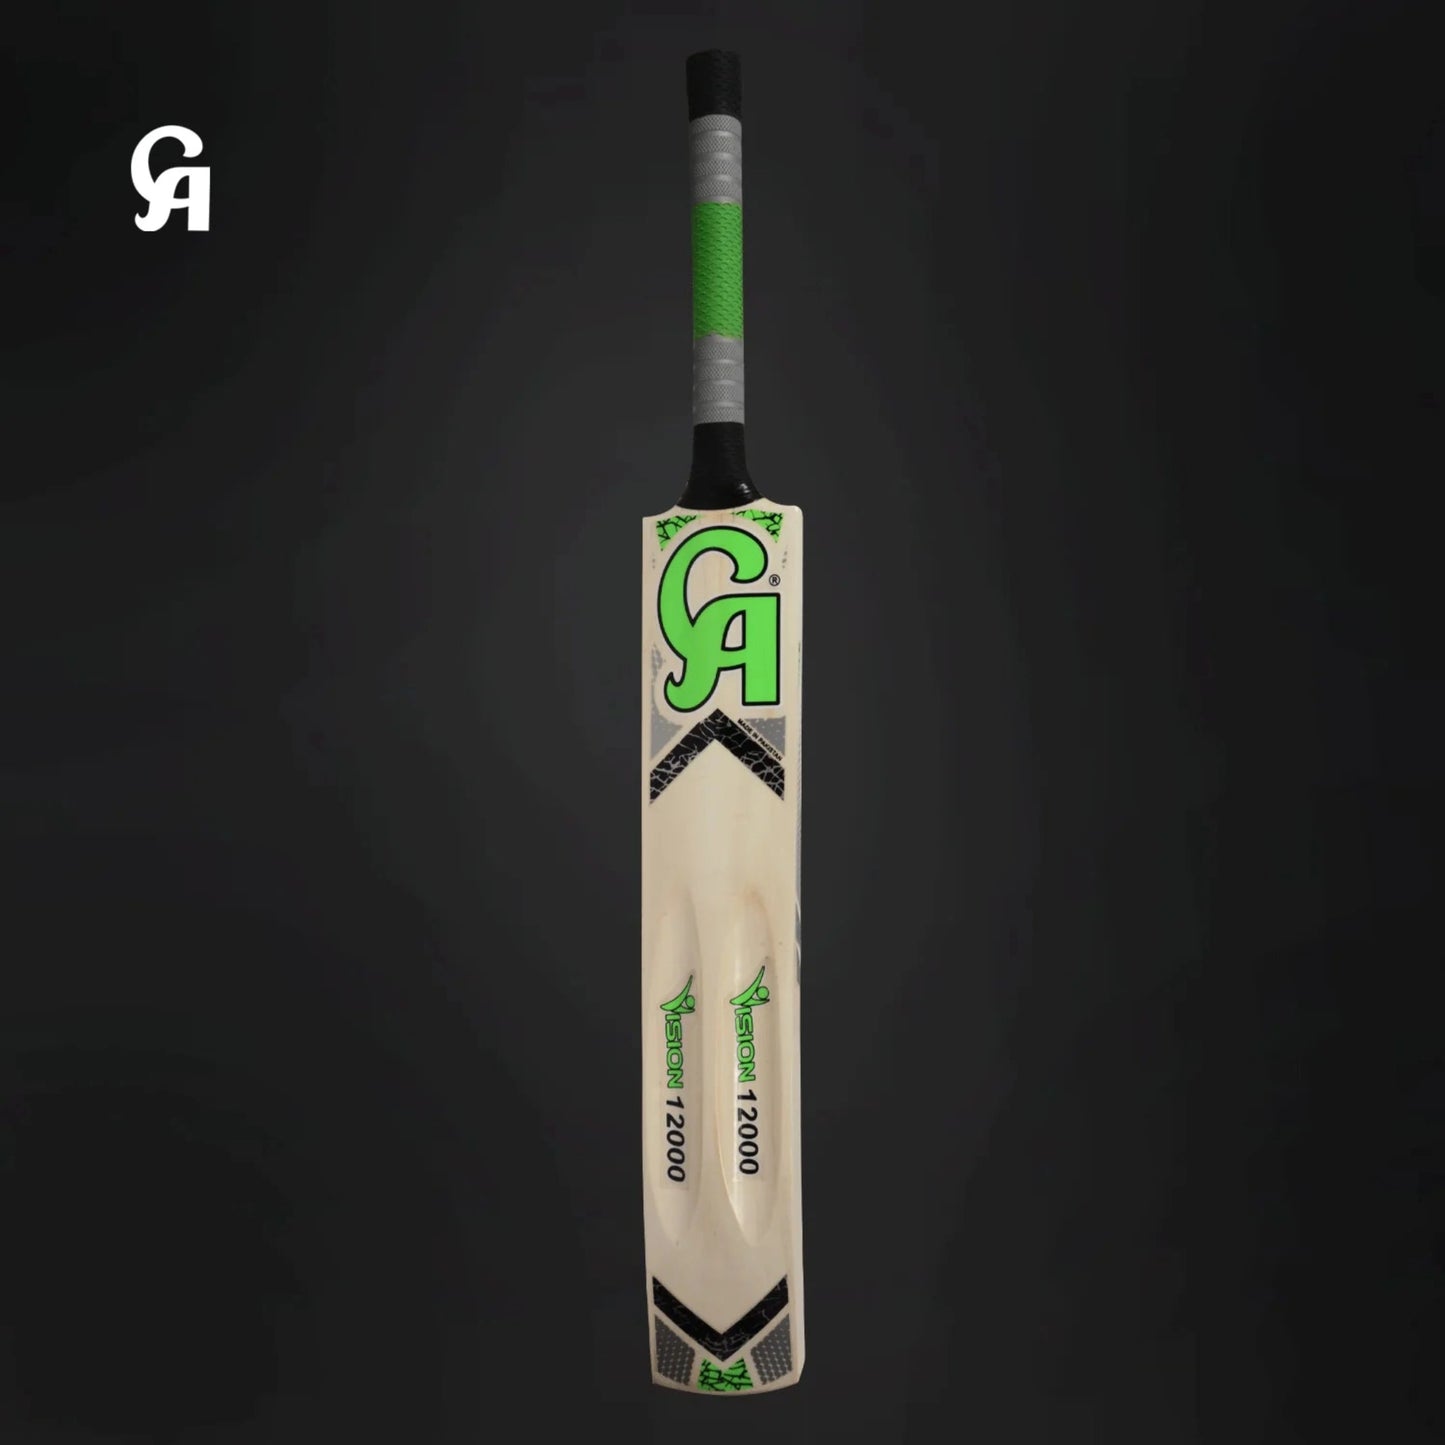 CA Vision 12000 tennis ball cricket bat in natural classic, crafted from Poplar wood, featuring a full cane handle with rubber sheets, thick edges for a lightweight feel, perfect for tournament play, and a double-colored grip.